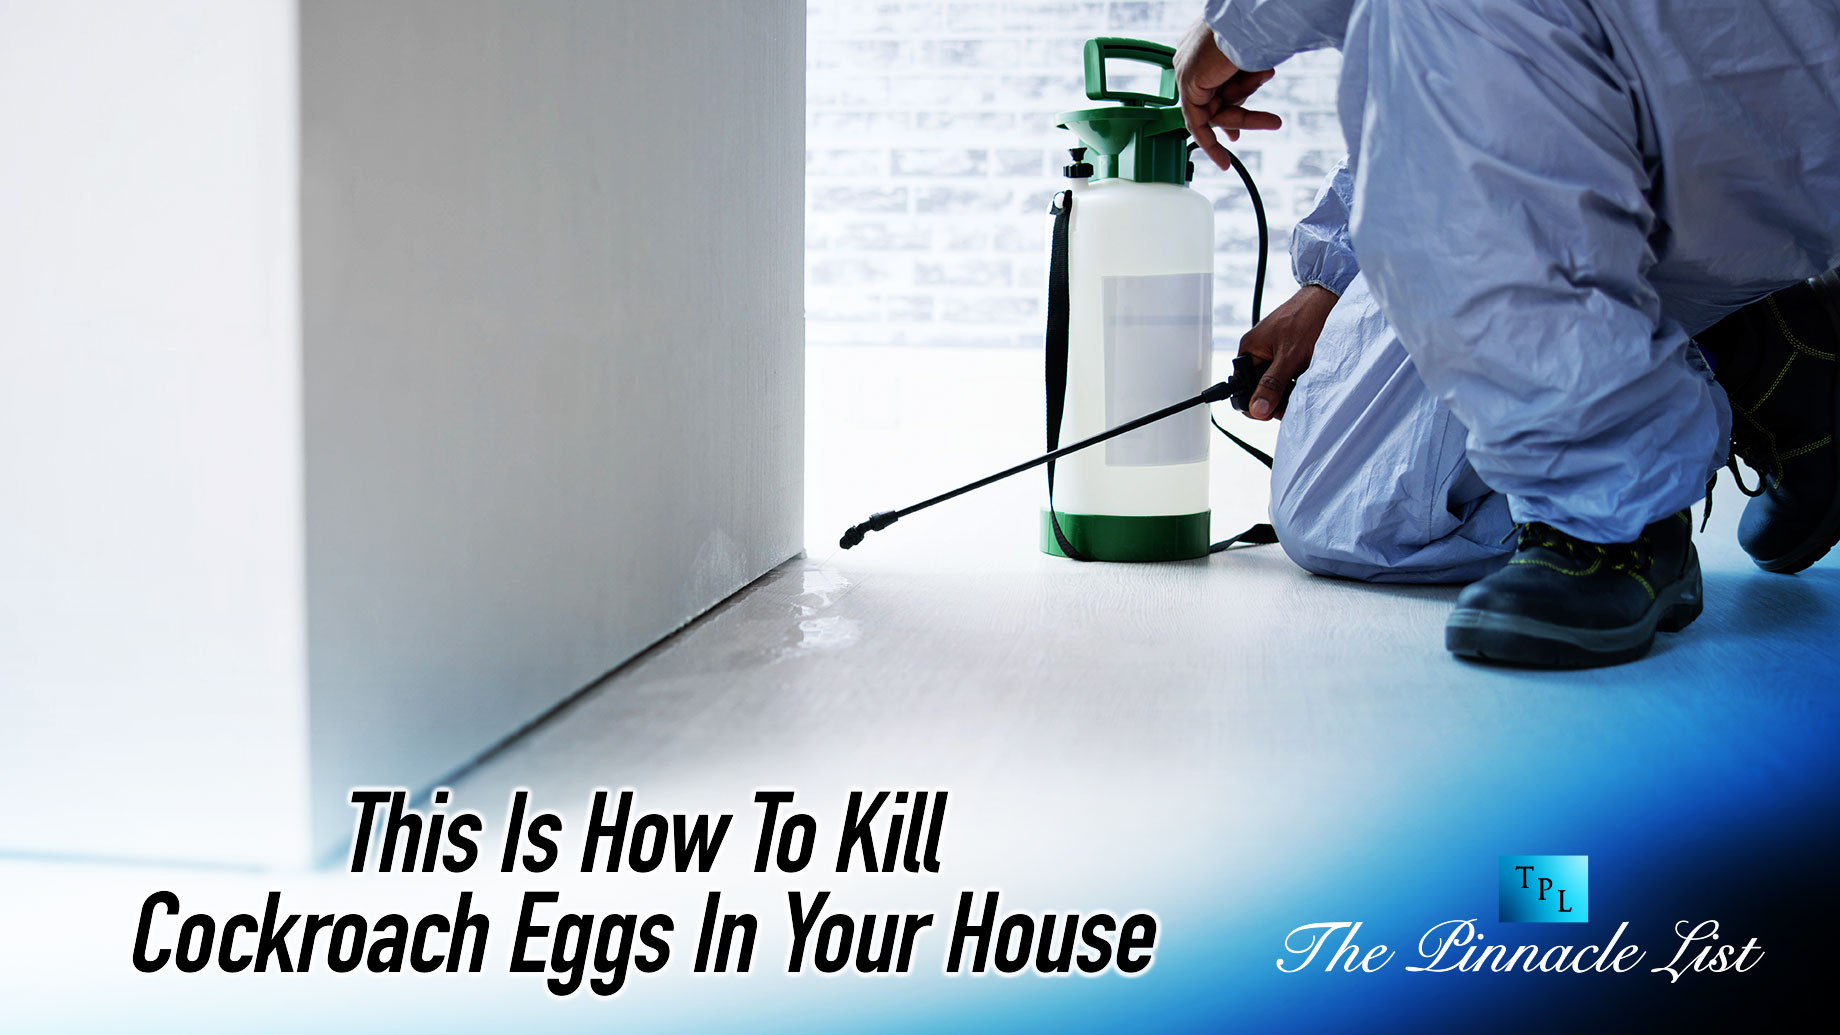 This Is How To Kill Cockroach Eggs In Your House